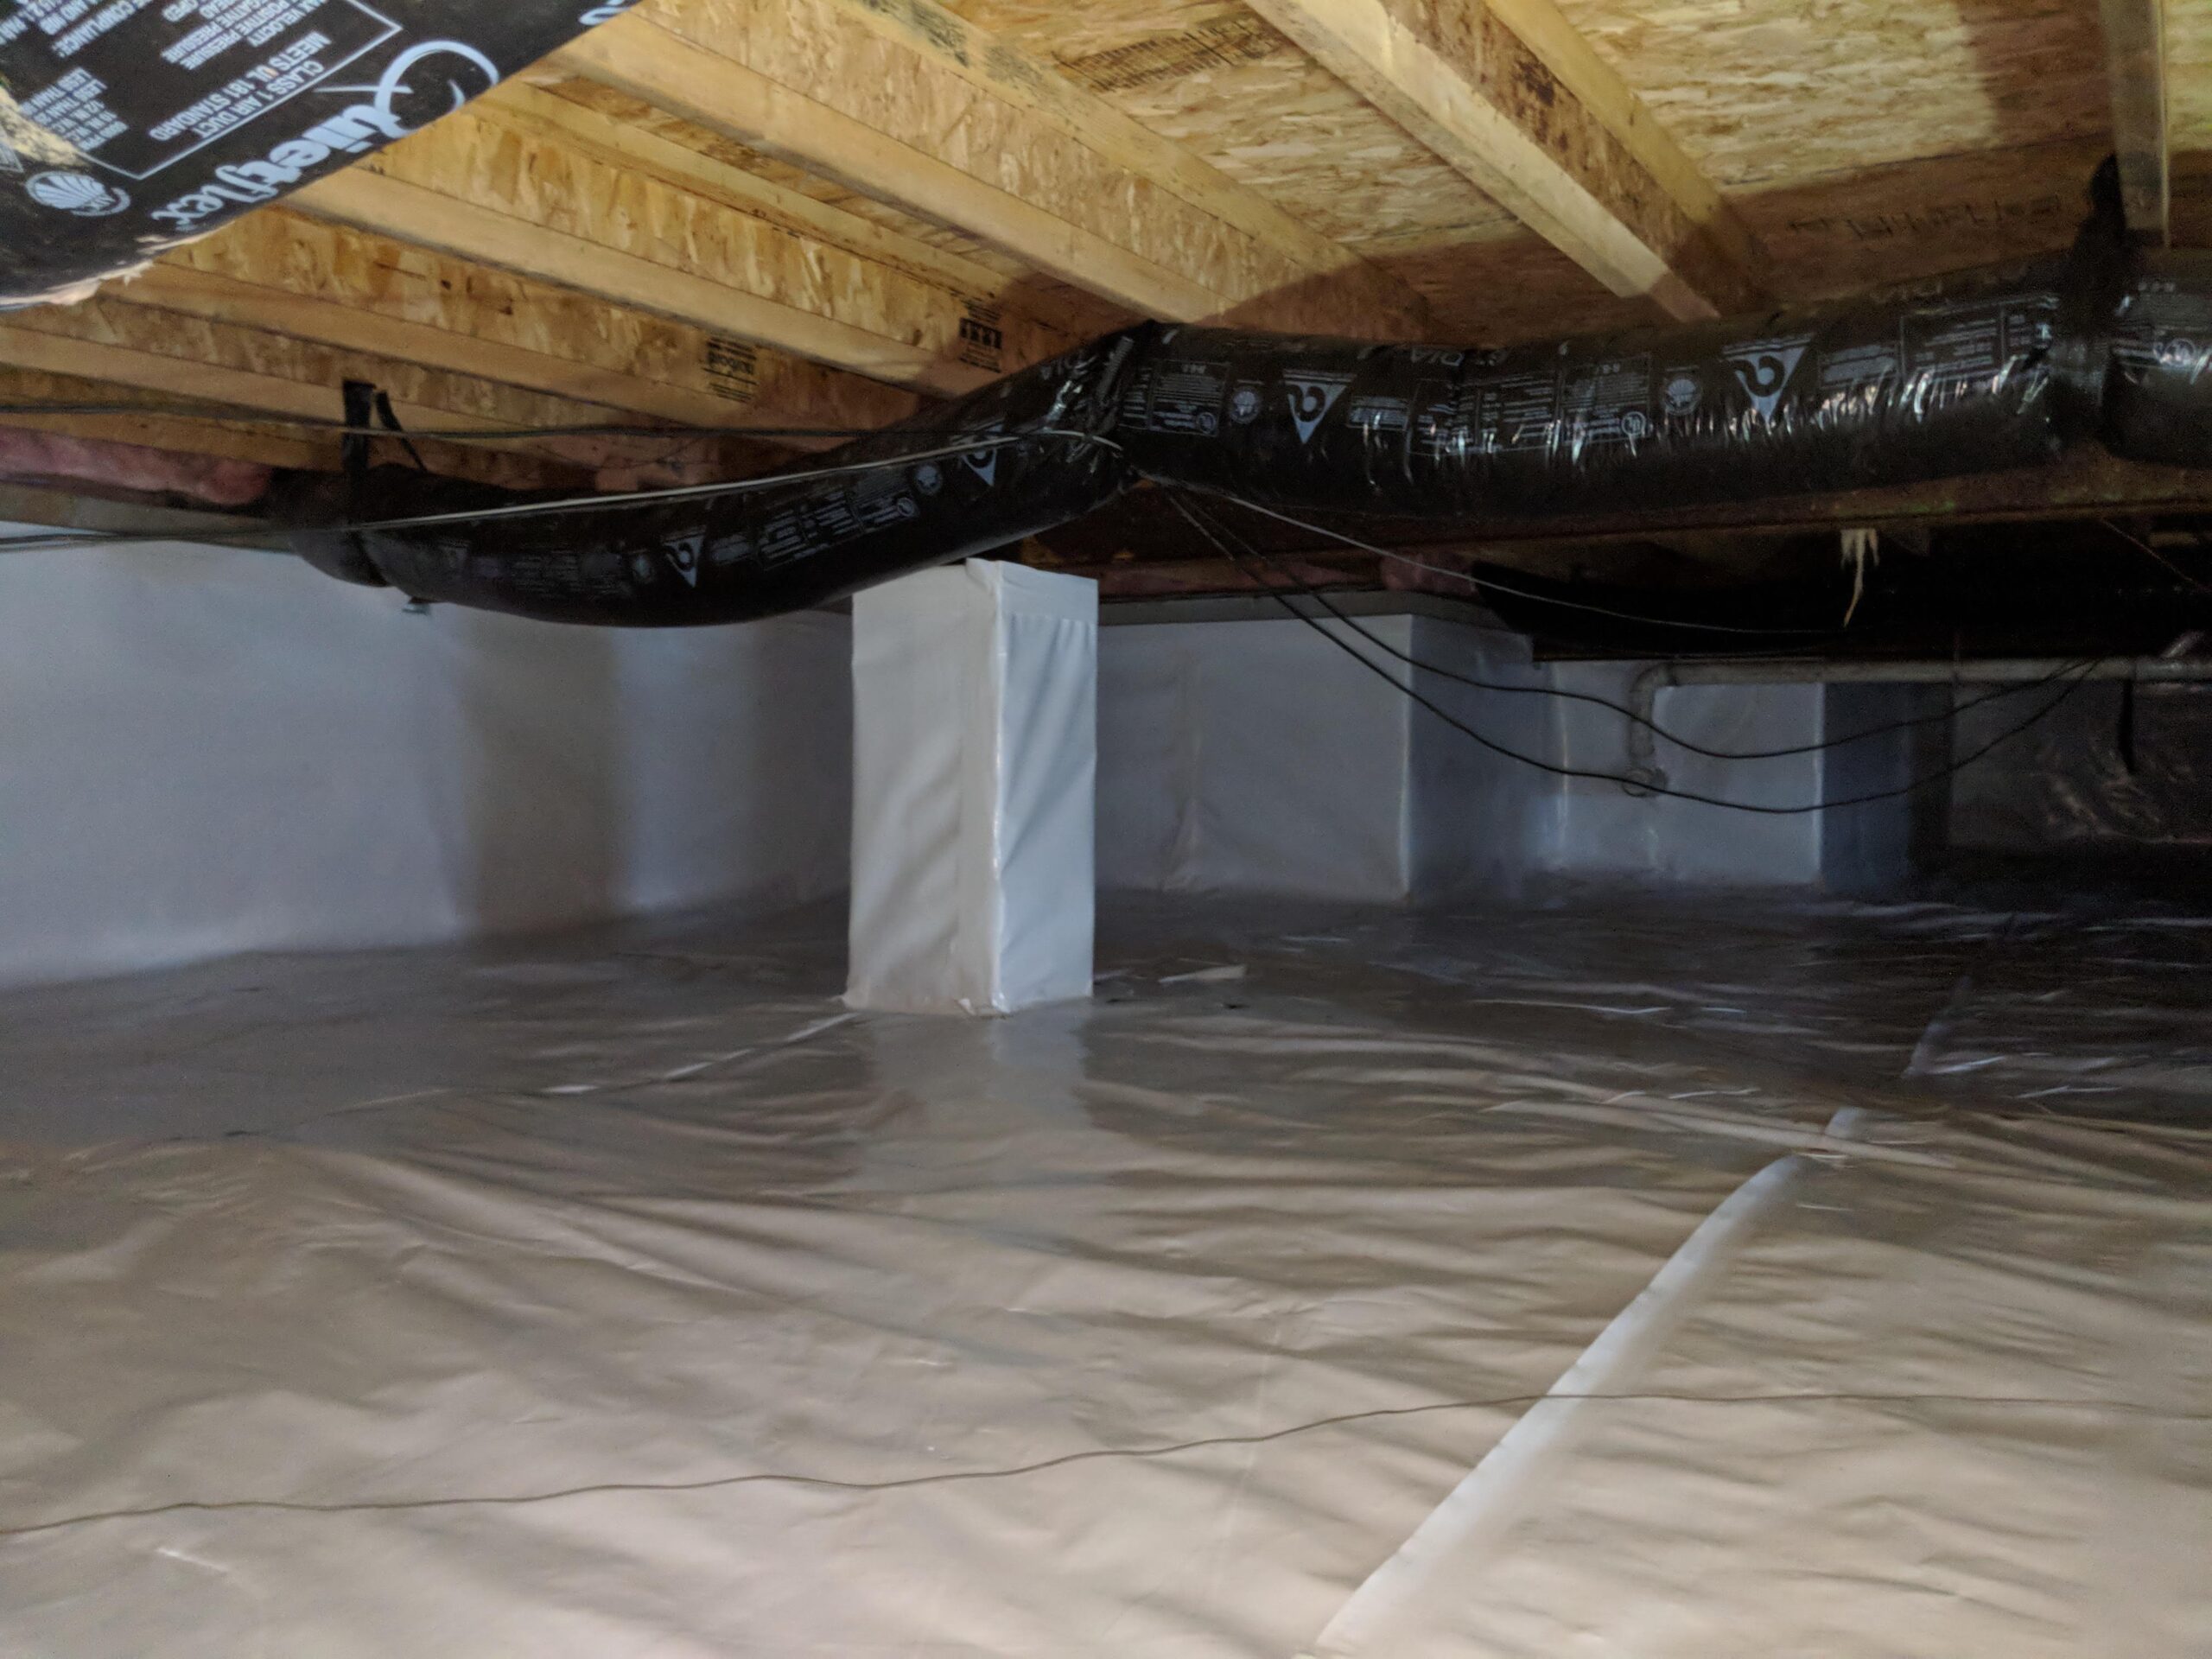 A Crawl Space After Cleaning | Crawl Space Contractor Delmarva